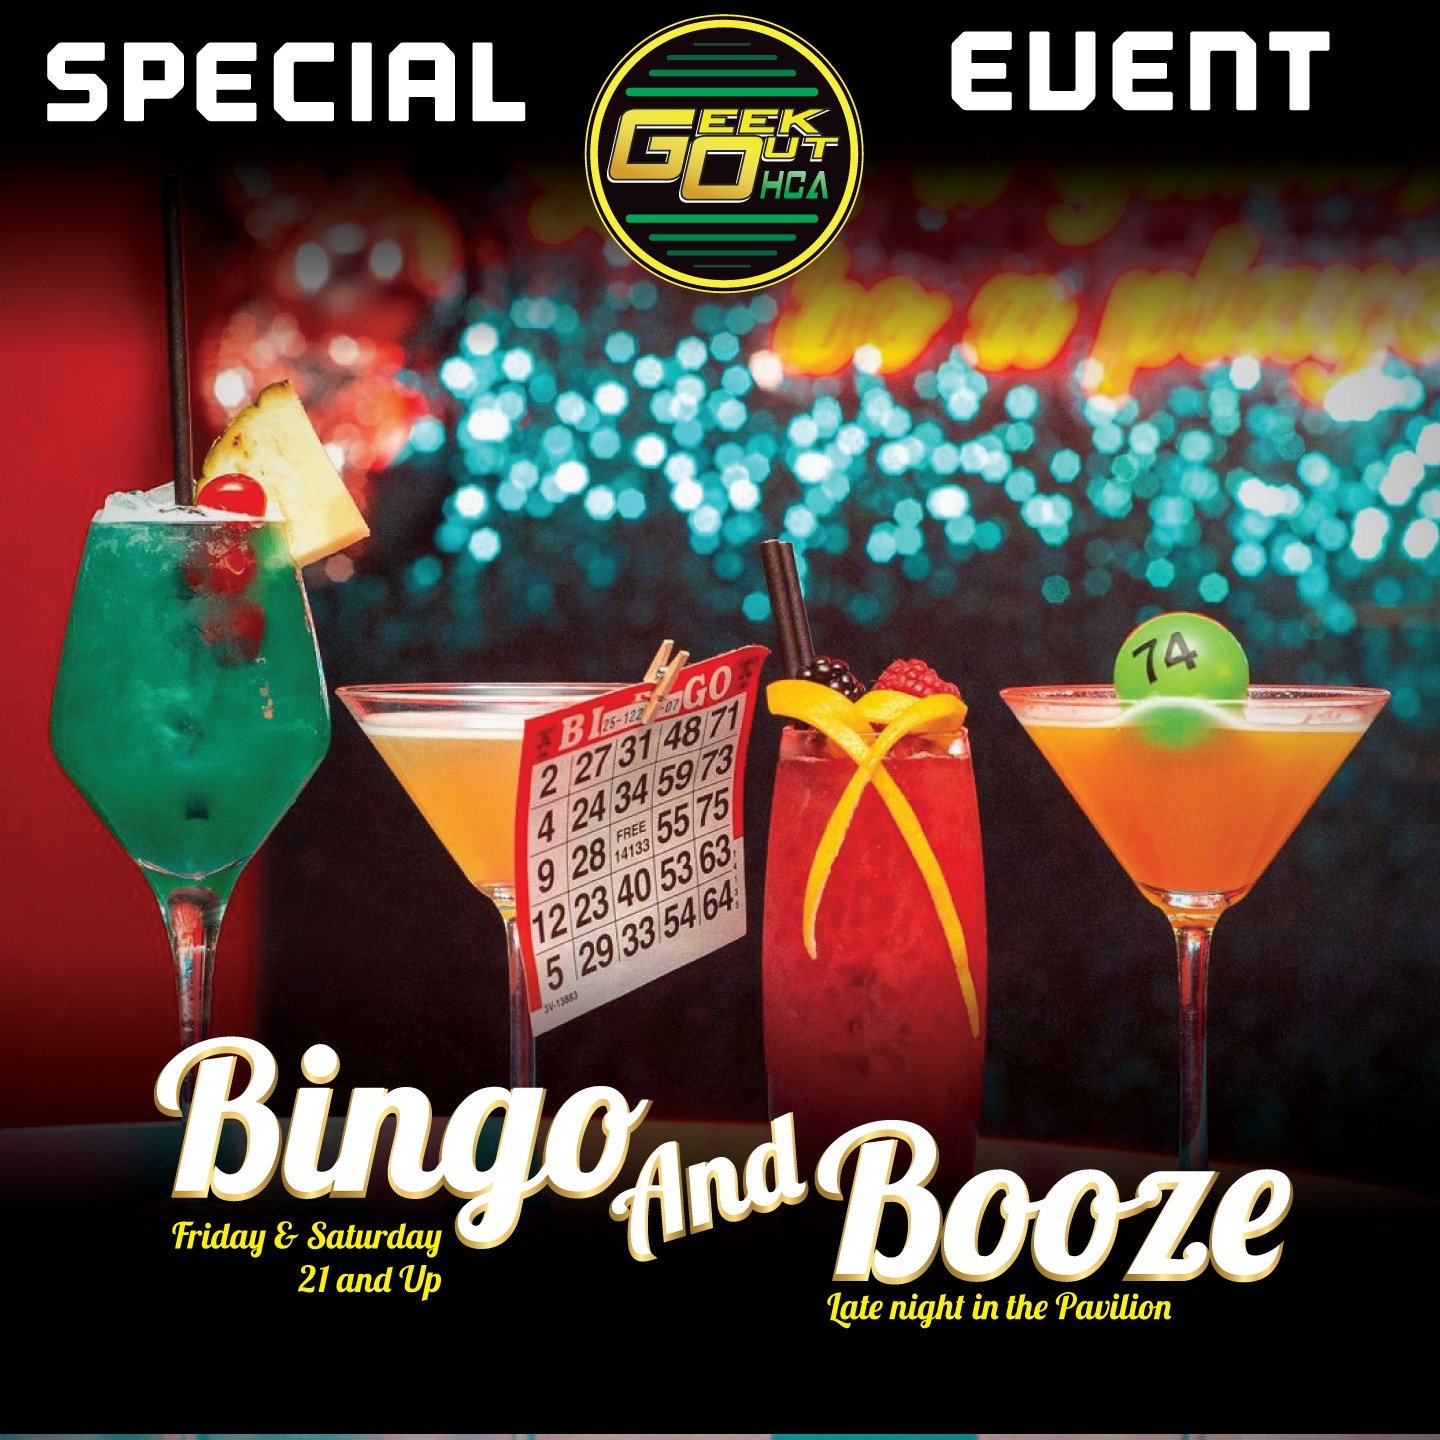   Grab your friends and your favorite drinks and join us for same late night fun! The wildly popular Bingo and Booze will take place in the Pavillion on Friday and Saturday nights, times will be posted with the panel lineup so keep an eye out for tha